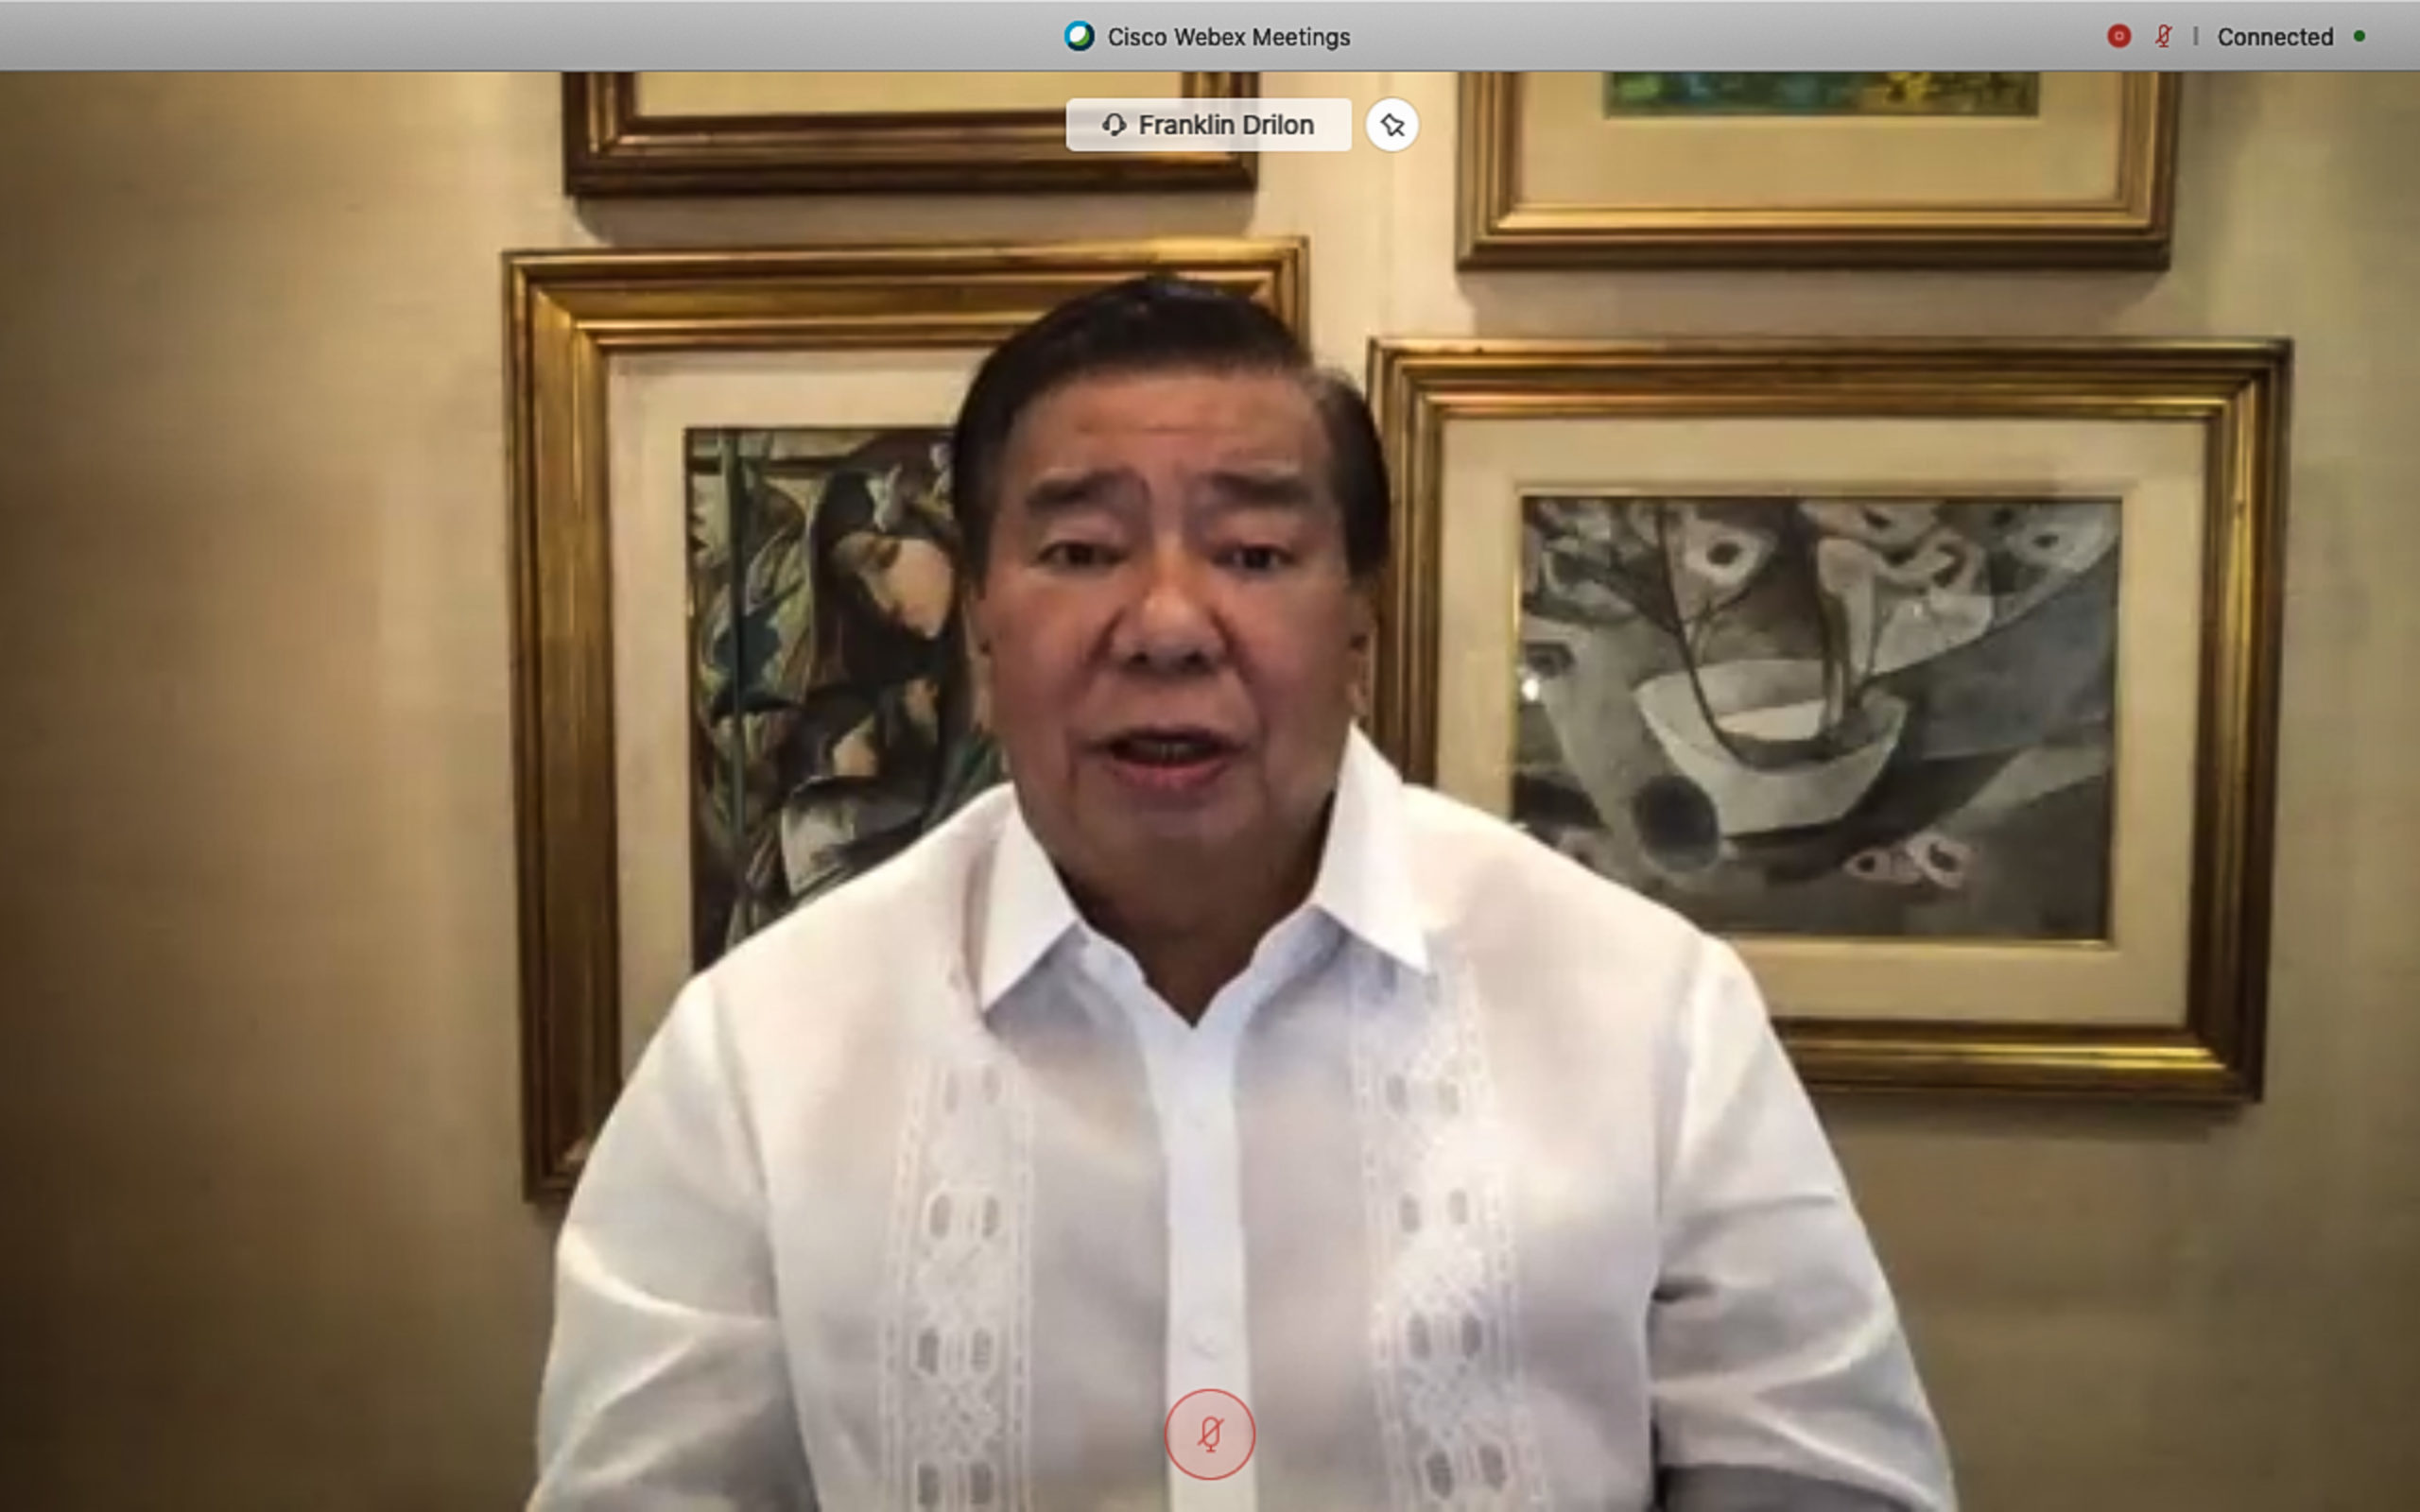 On non-expiration of franchise: Senate Minority Leader Franklin Drilon, during the Committee on Constitutional Amendments and Revision of Codes virtual hearing Wednesday, May 27, 2020, says Senate Bill 1530, which aims to amend Section 18, Book VII, Chapter 3 of the Administrative Code of the Philippines or the Non-expiration of License or Franchise, would not diminish the power of Congress to legislate franchises. Drilon, noting that the National Telecommunications Commission did not issue before cease and desist order against other broadcast stations with expired franchises, said the measure would remedy the unequal protection of the law that ABS-CBN Broadcast Corp. had suffered. (Screen grab/Senate PRIB)